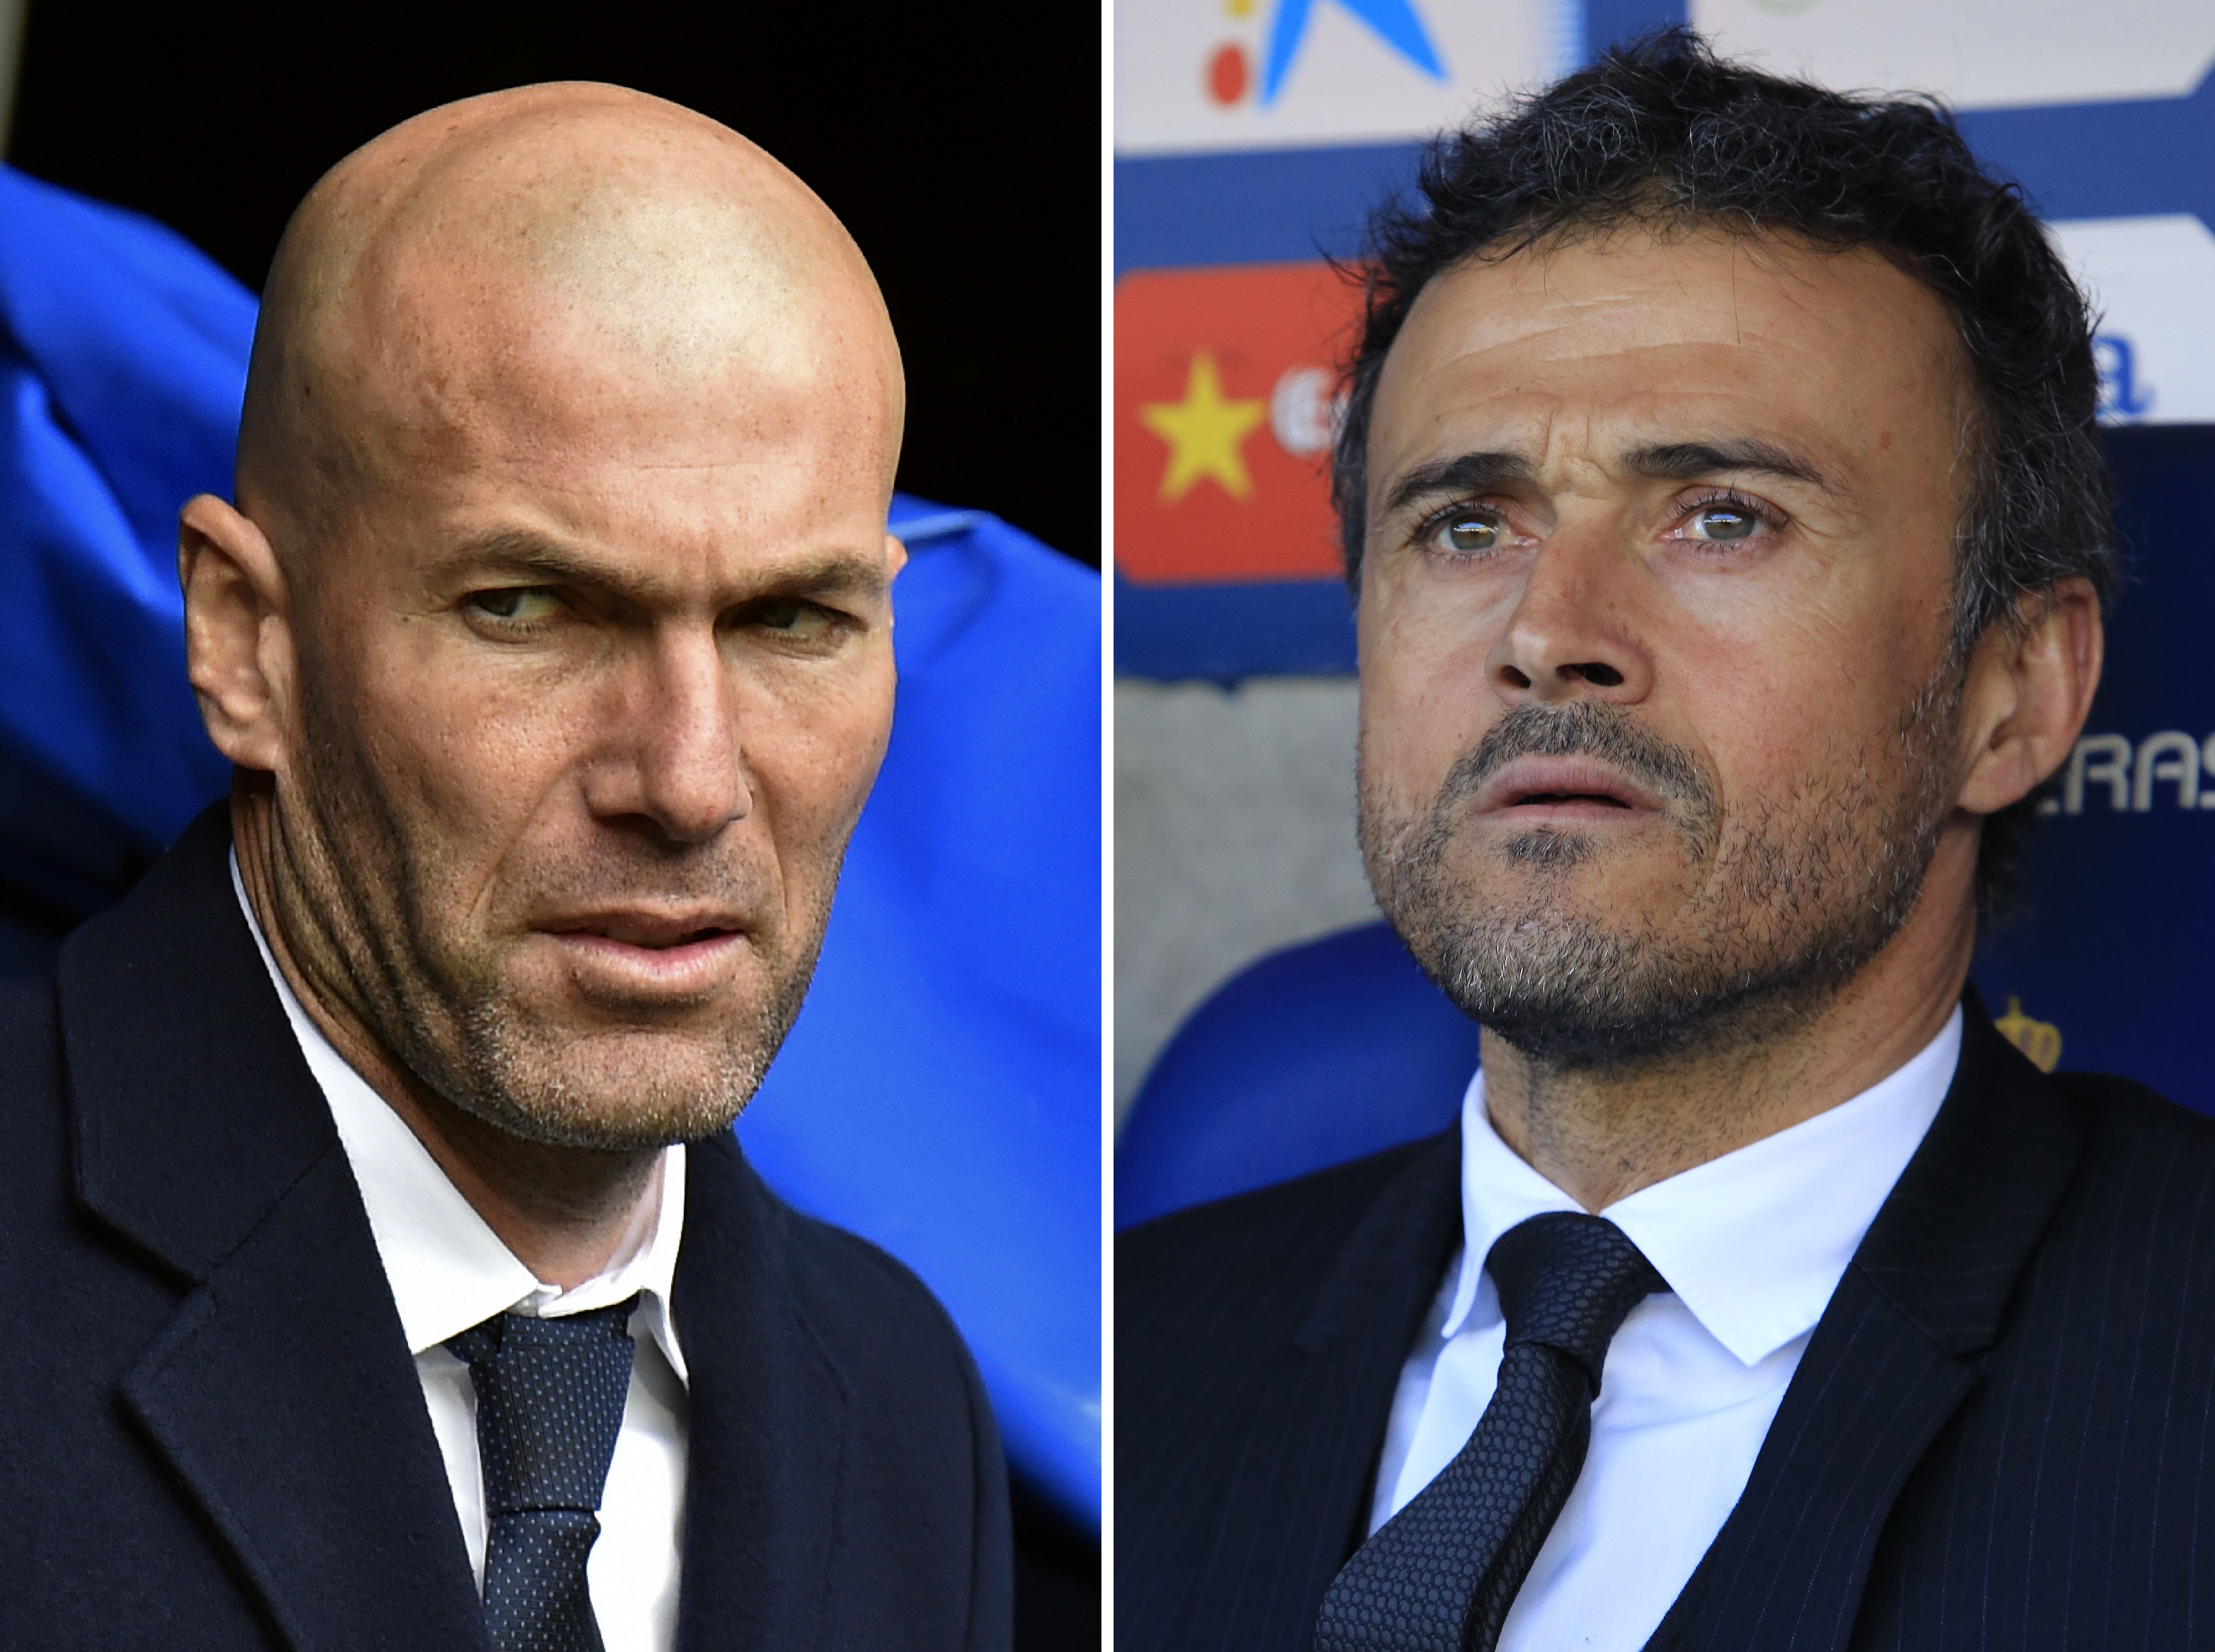 (FILES) A combination of two pictures made on April 1st, 2016 shows Real Madrid's French coach Zinedine Zidane (L) before the Spanish league football match Real Madrid CF vs RC Celta de Vigo at the Santiago Bernabeu stadium in Madrid on March 5, 2016 and Barcelona's coach Luis Enrique before the Spanish league football match RCD Espanyol vs FC Barcelona at the Power8 stadium in Cornella de Llobregat on January 2, 2016.
Barcelona will honour legendary former player and coach Johan Cruyff as they look to inflict more misery upon eternal rivals Real Madrid in the Clasico on April 2nd, 2016. / AFP / GERARD JULIEN AND PAU BARRENA        (Photo credit should read GERARD JULIEN,PAU BARRENA/AFP/Getty Images)